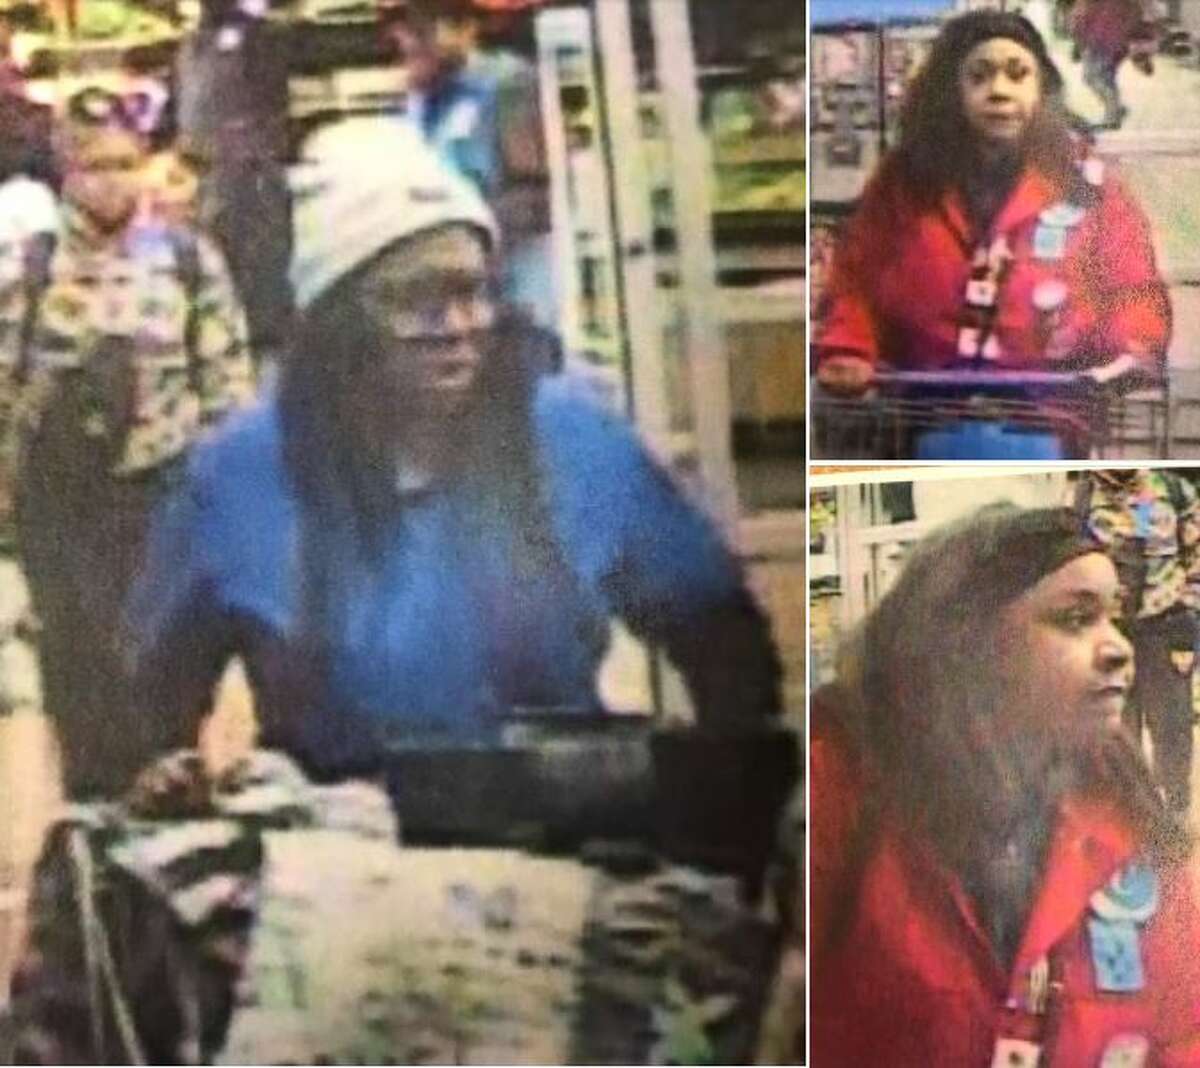 East Windsor Police say they are looking for the pair of suspected thieves. Two men left a local Walmart store without paying for the goods, and one threatened to shoot an approaching security guard, police said. 